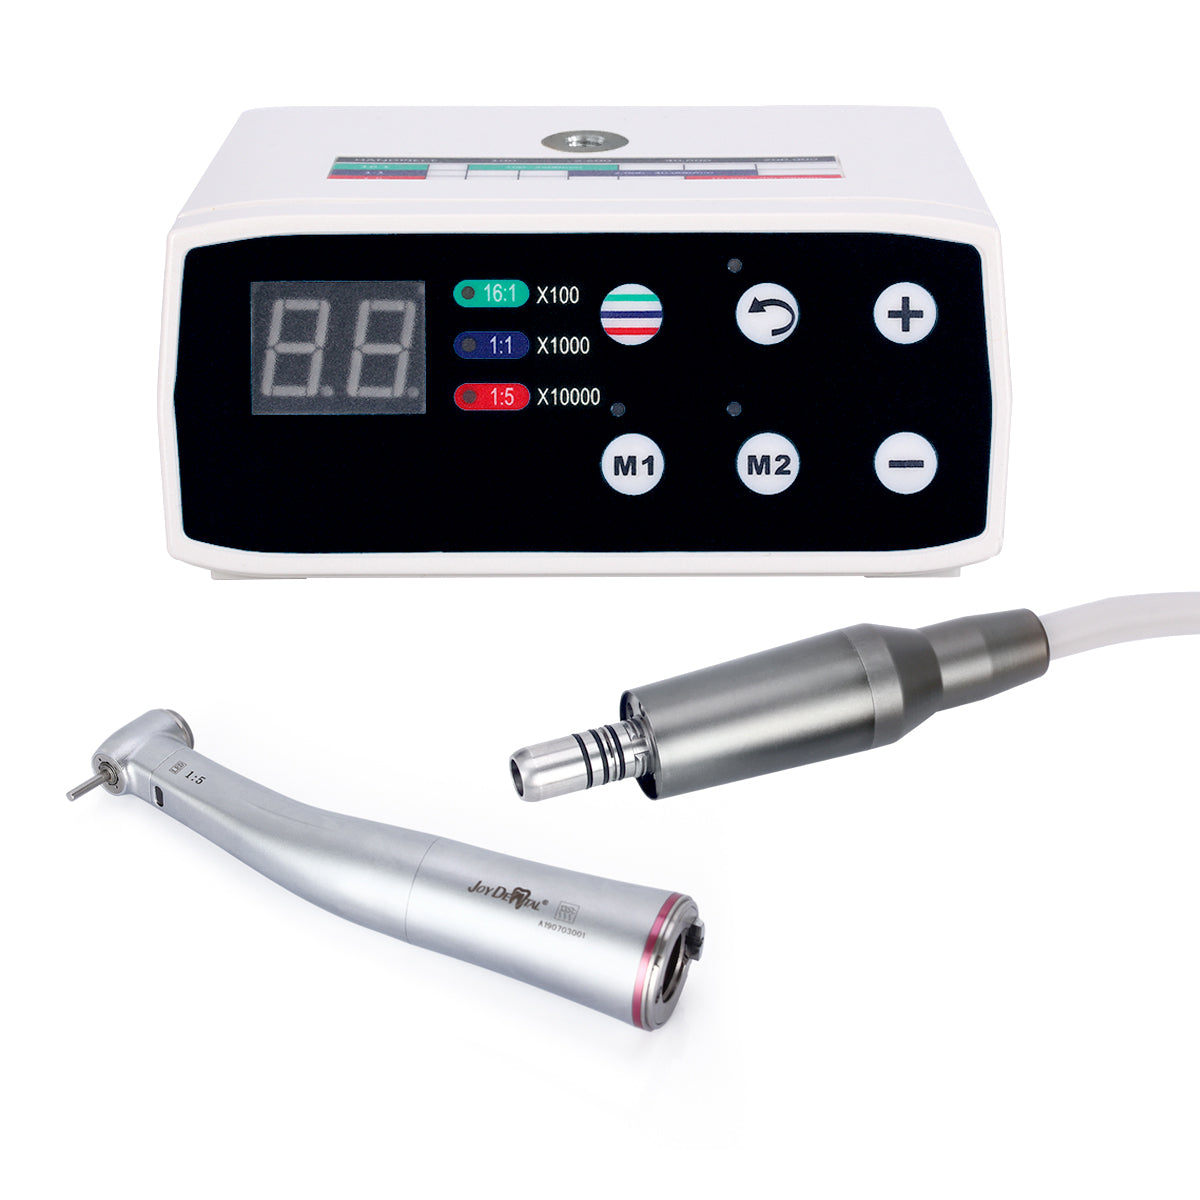 Dental LED Brushless Micro Motor+1:5 LED Increasing Contra Angle Handpiece - pairaydental.com